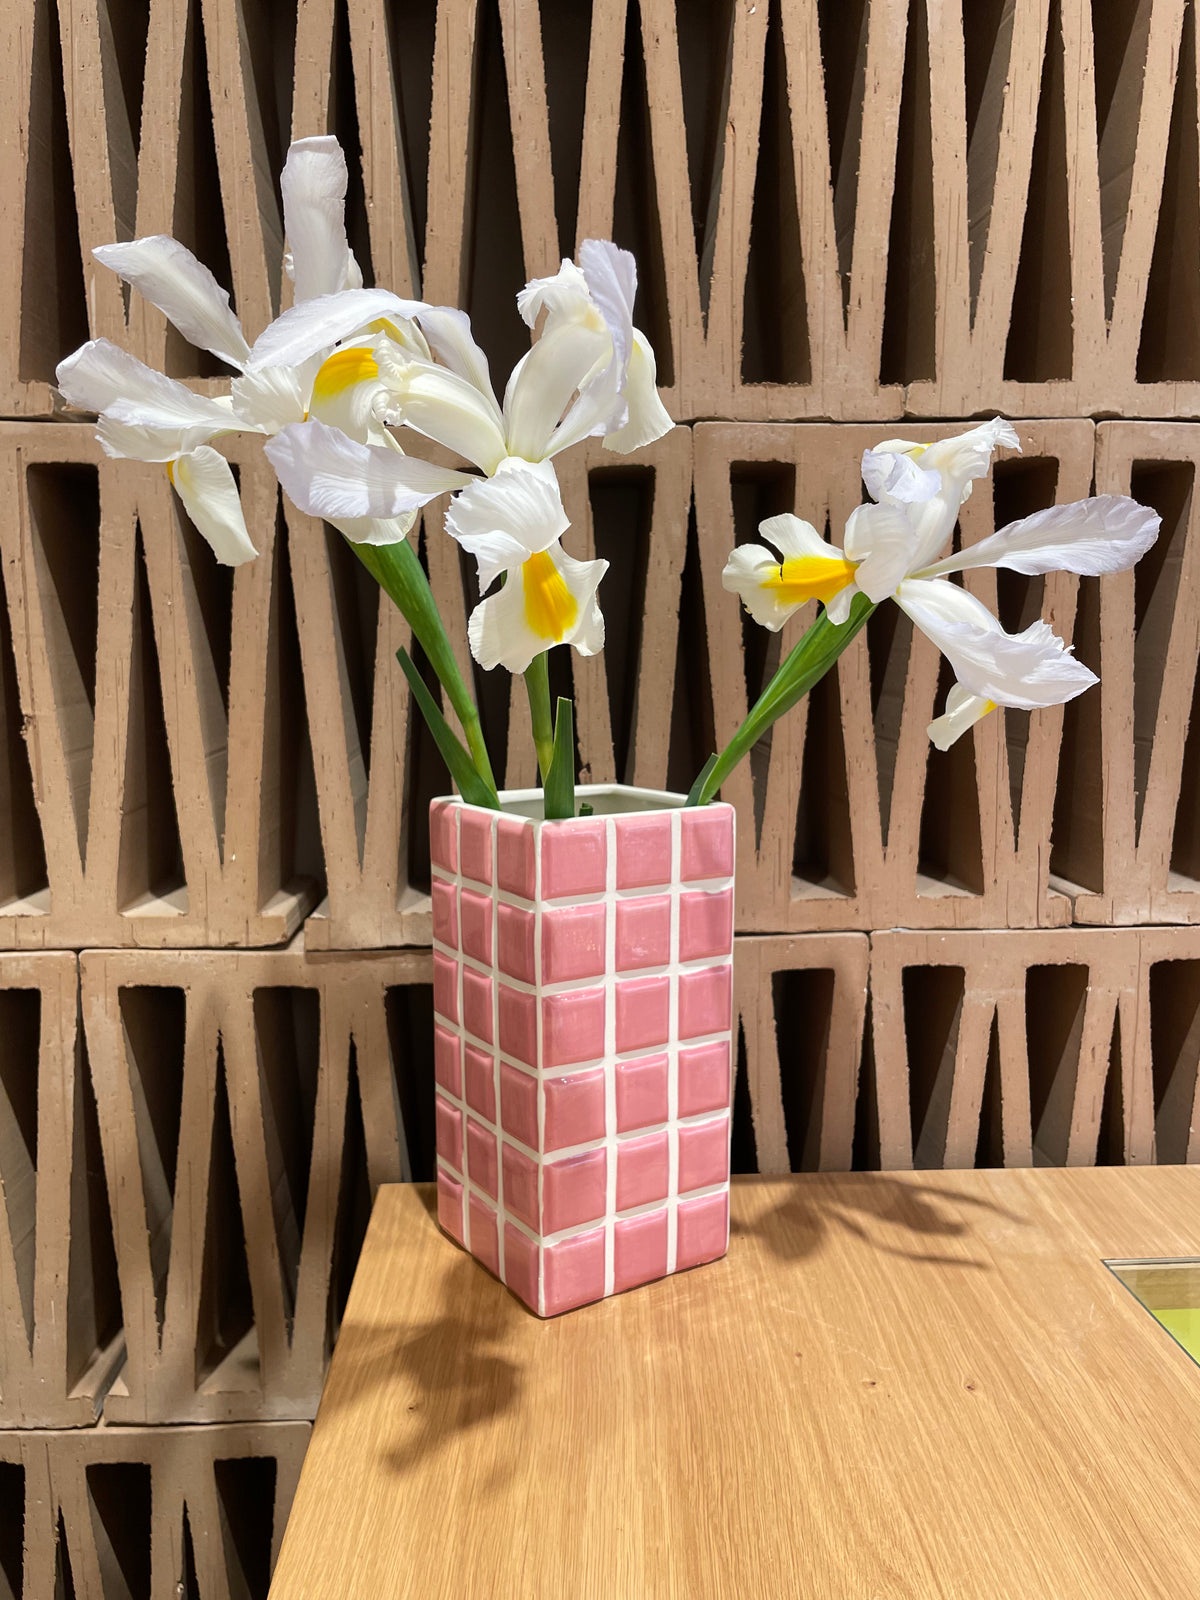 SMALL VASE "TILE" PINK